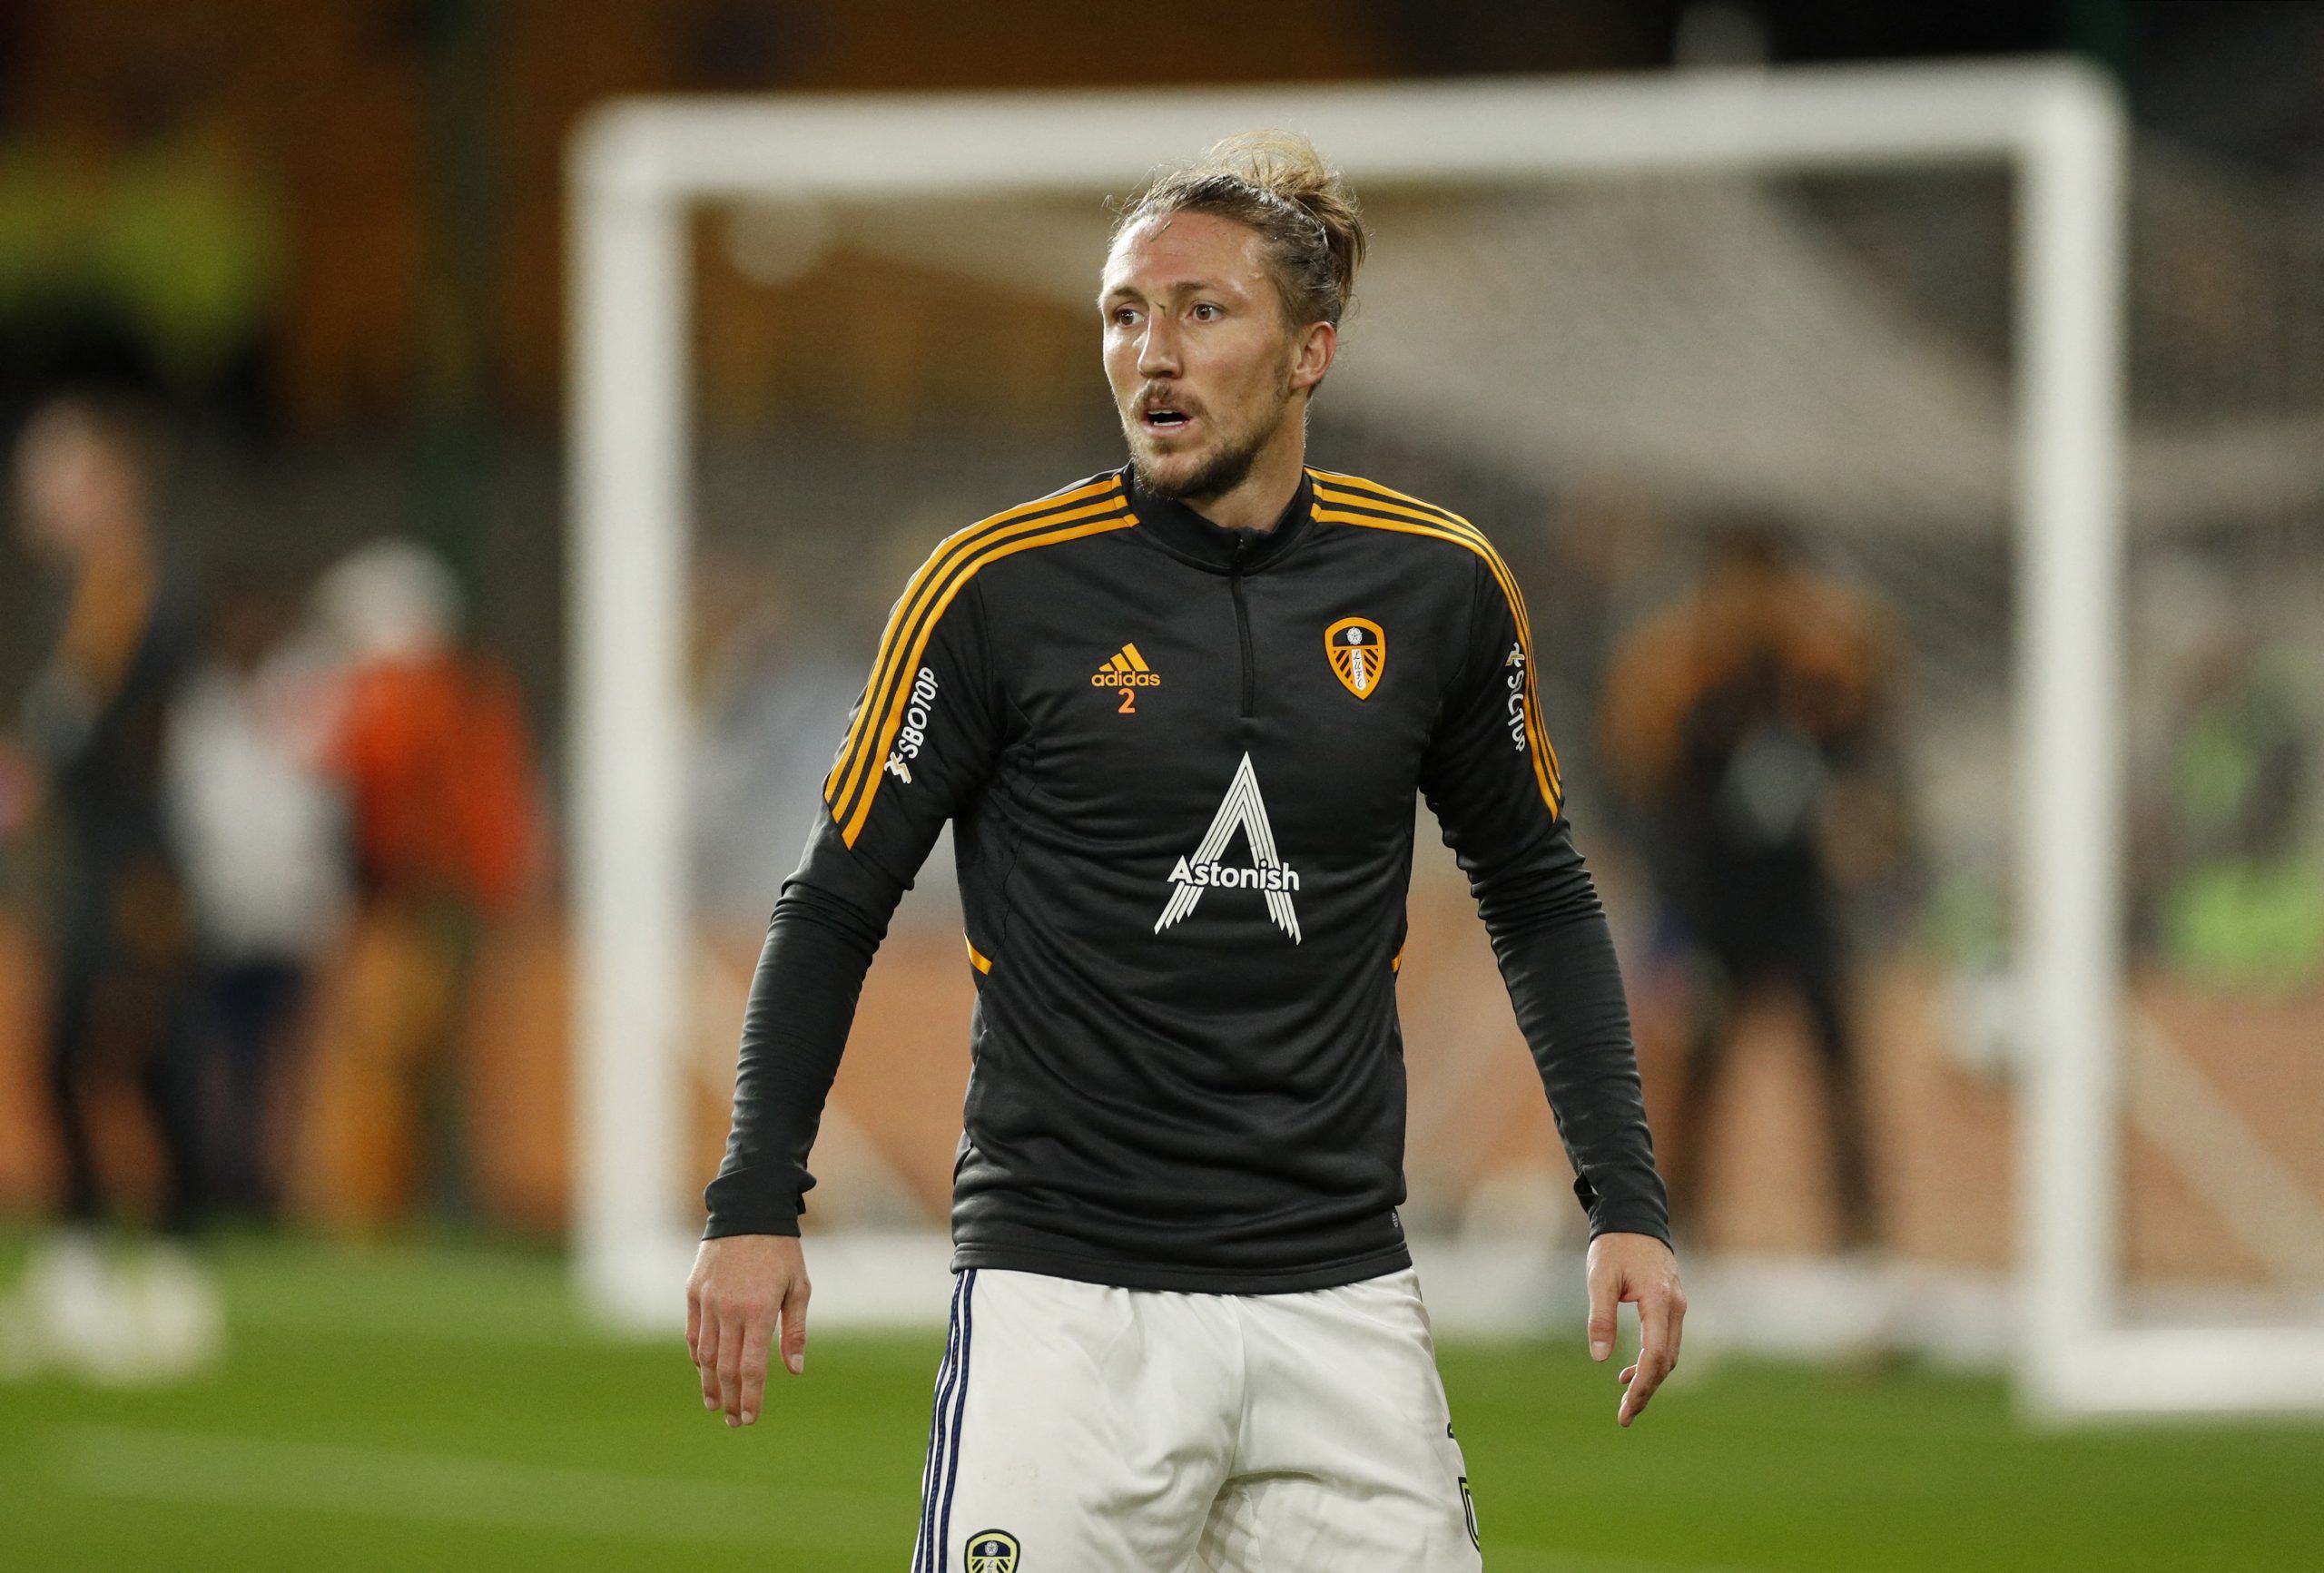 Soccer Football - Carabao Cup Third Round - Wolverhampton Wanderers v Leeds United - Molineux Stadium, Wolverhampton, Britain - November 9, 2022 Leeds United's Luke Ayling during the warm up before the match Action Images via Reuters/Andrew Boyers EDITORIAL USE ONLY. No use with unauthorized audio, video, data, fixture lists, club/league logos or 'live' services. Online in-match use limited to 75 images, no video emulation. No use in betting, games or single club /league/player publications.  Pl